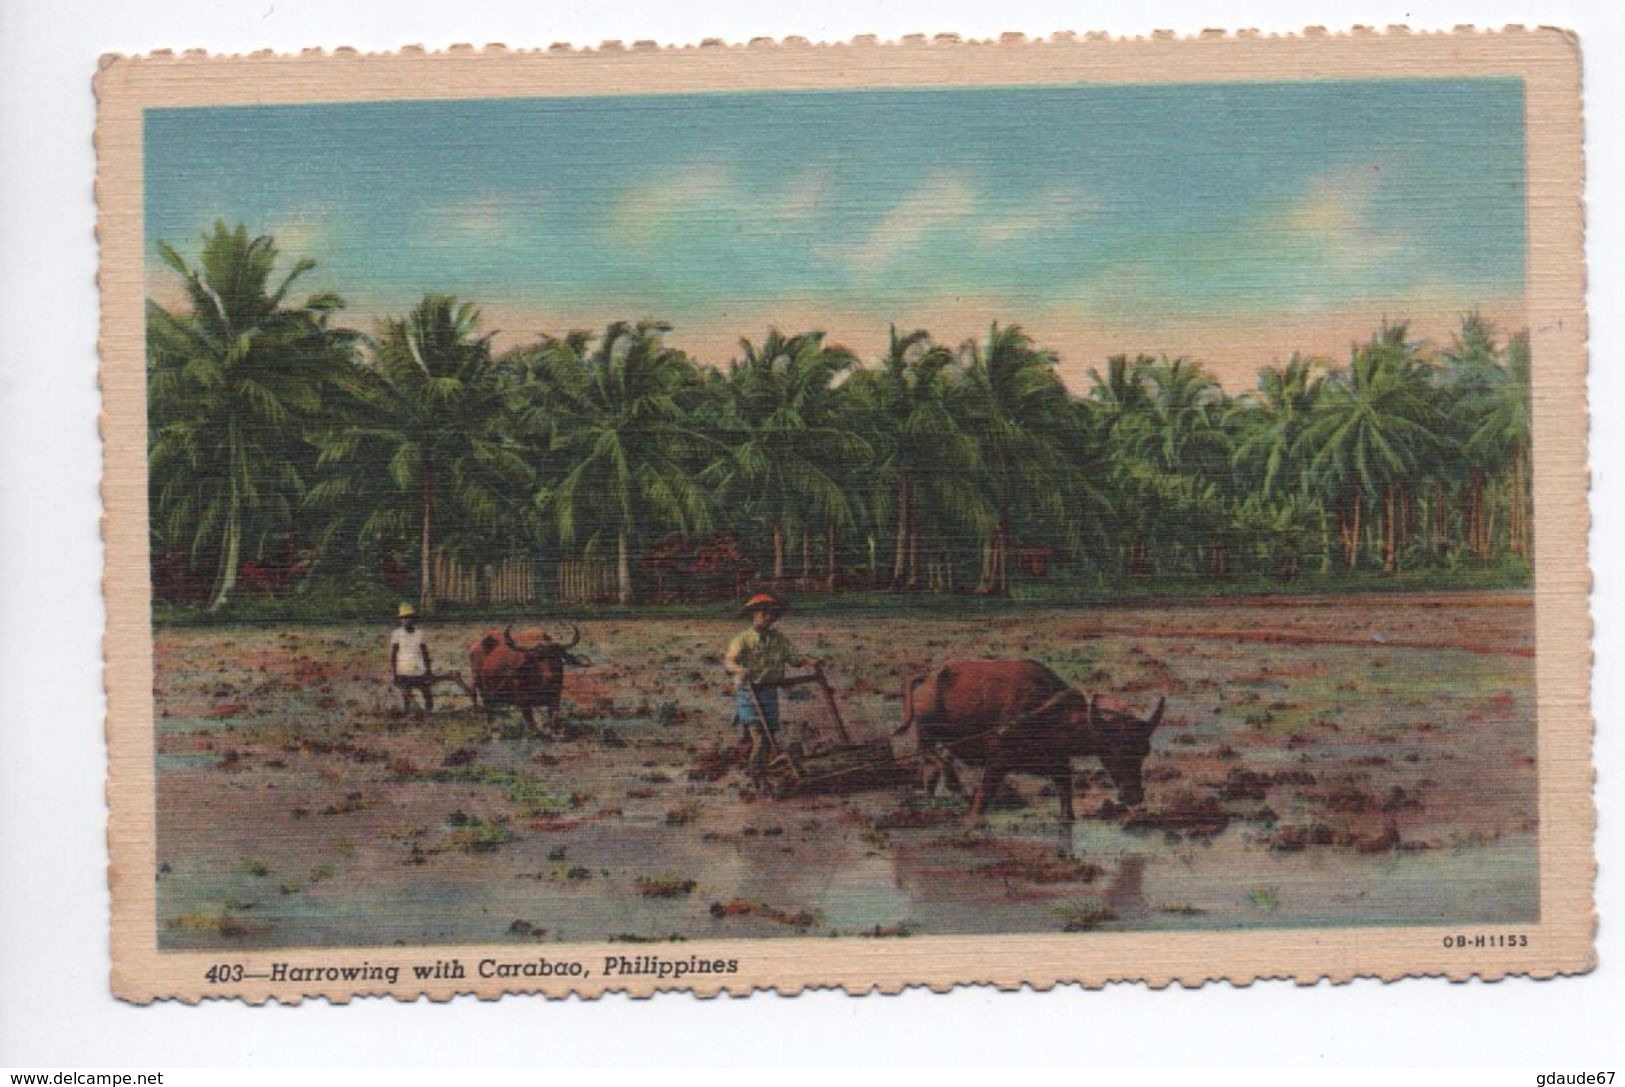 PHILIPPINES - HARROWING WITH CARABAO - AGRICULTURE - Filippine